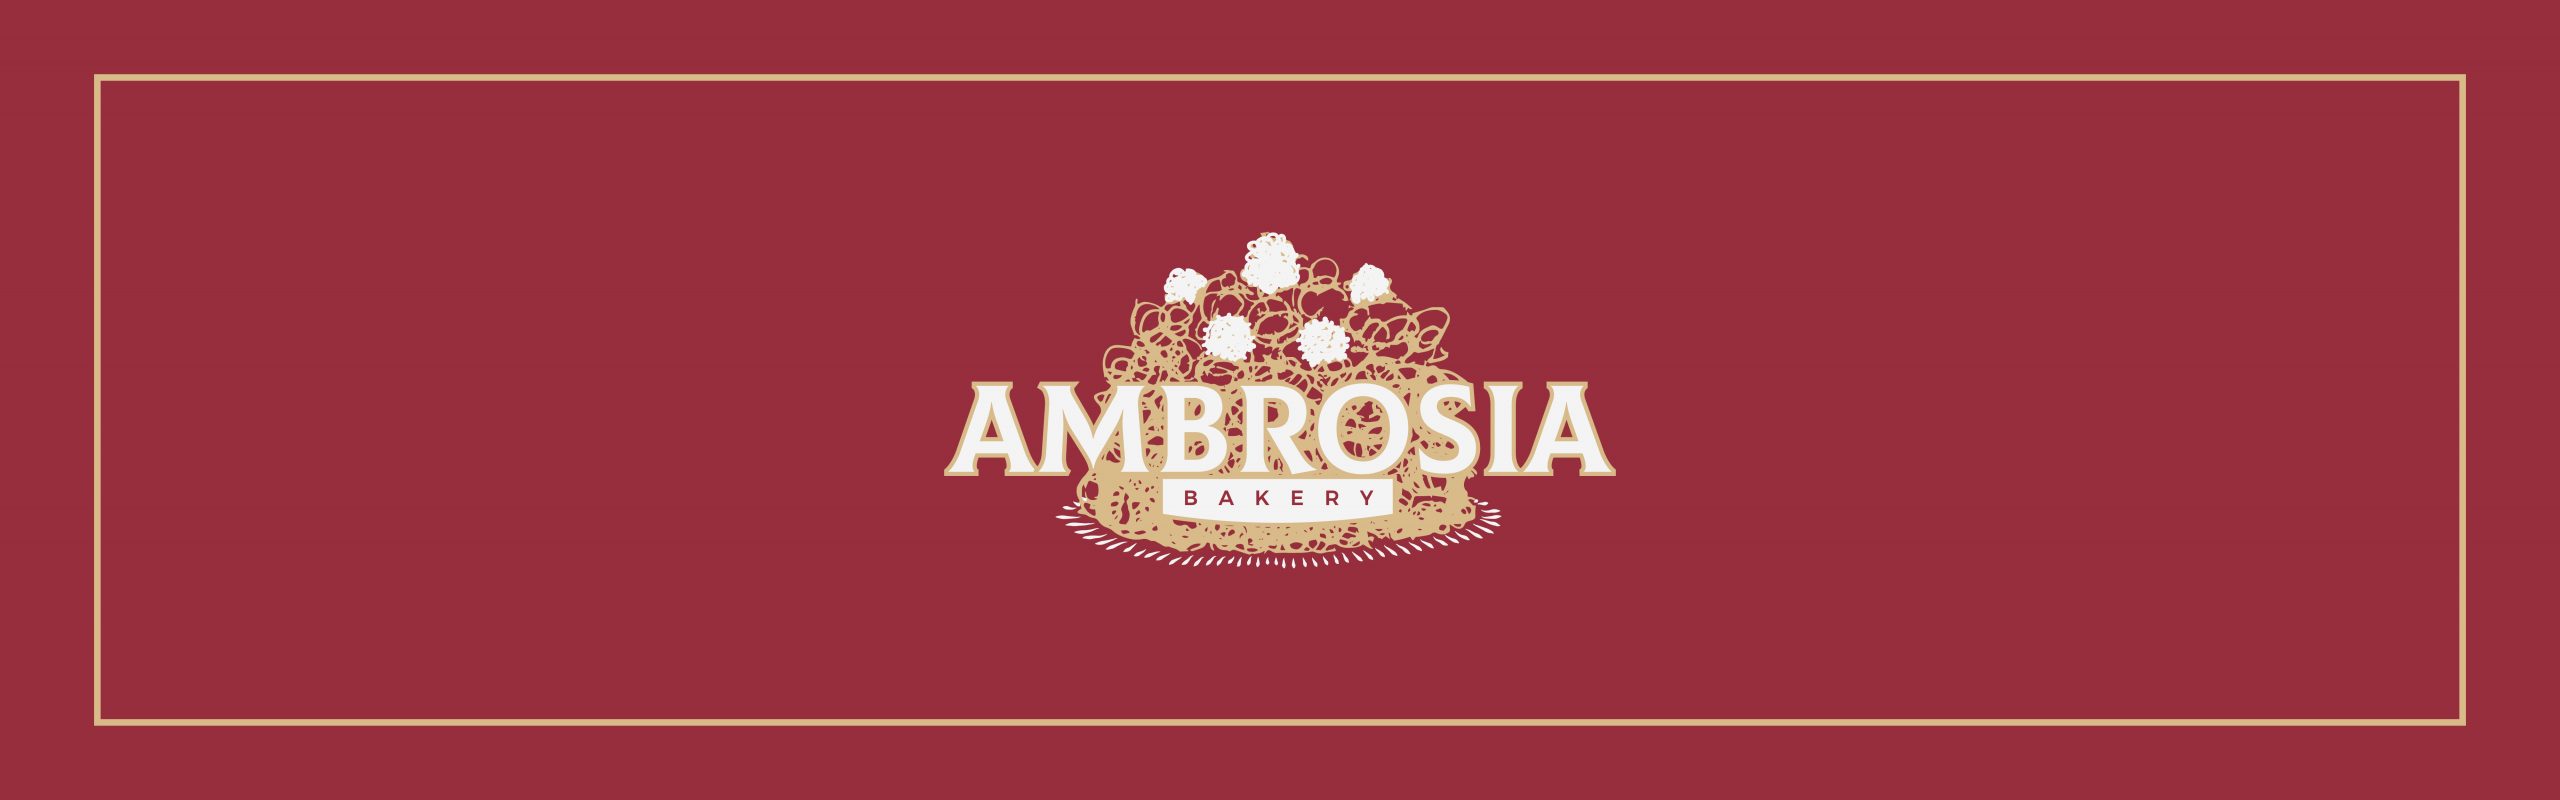 The image displays a logo for "Ambrosia Bakery" set against a deep red background, with decorative elements around the text that suggest a connection to baking or culinary arts.